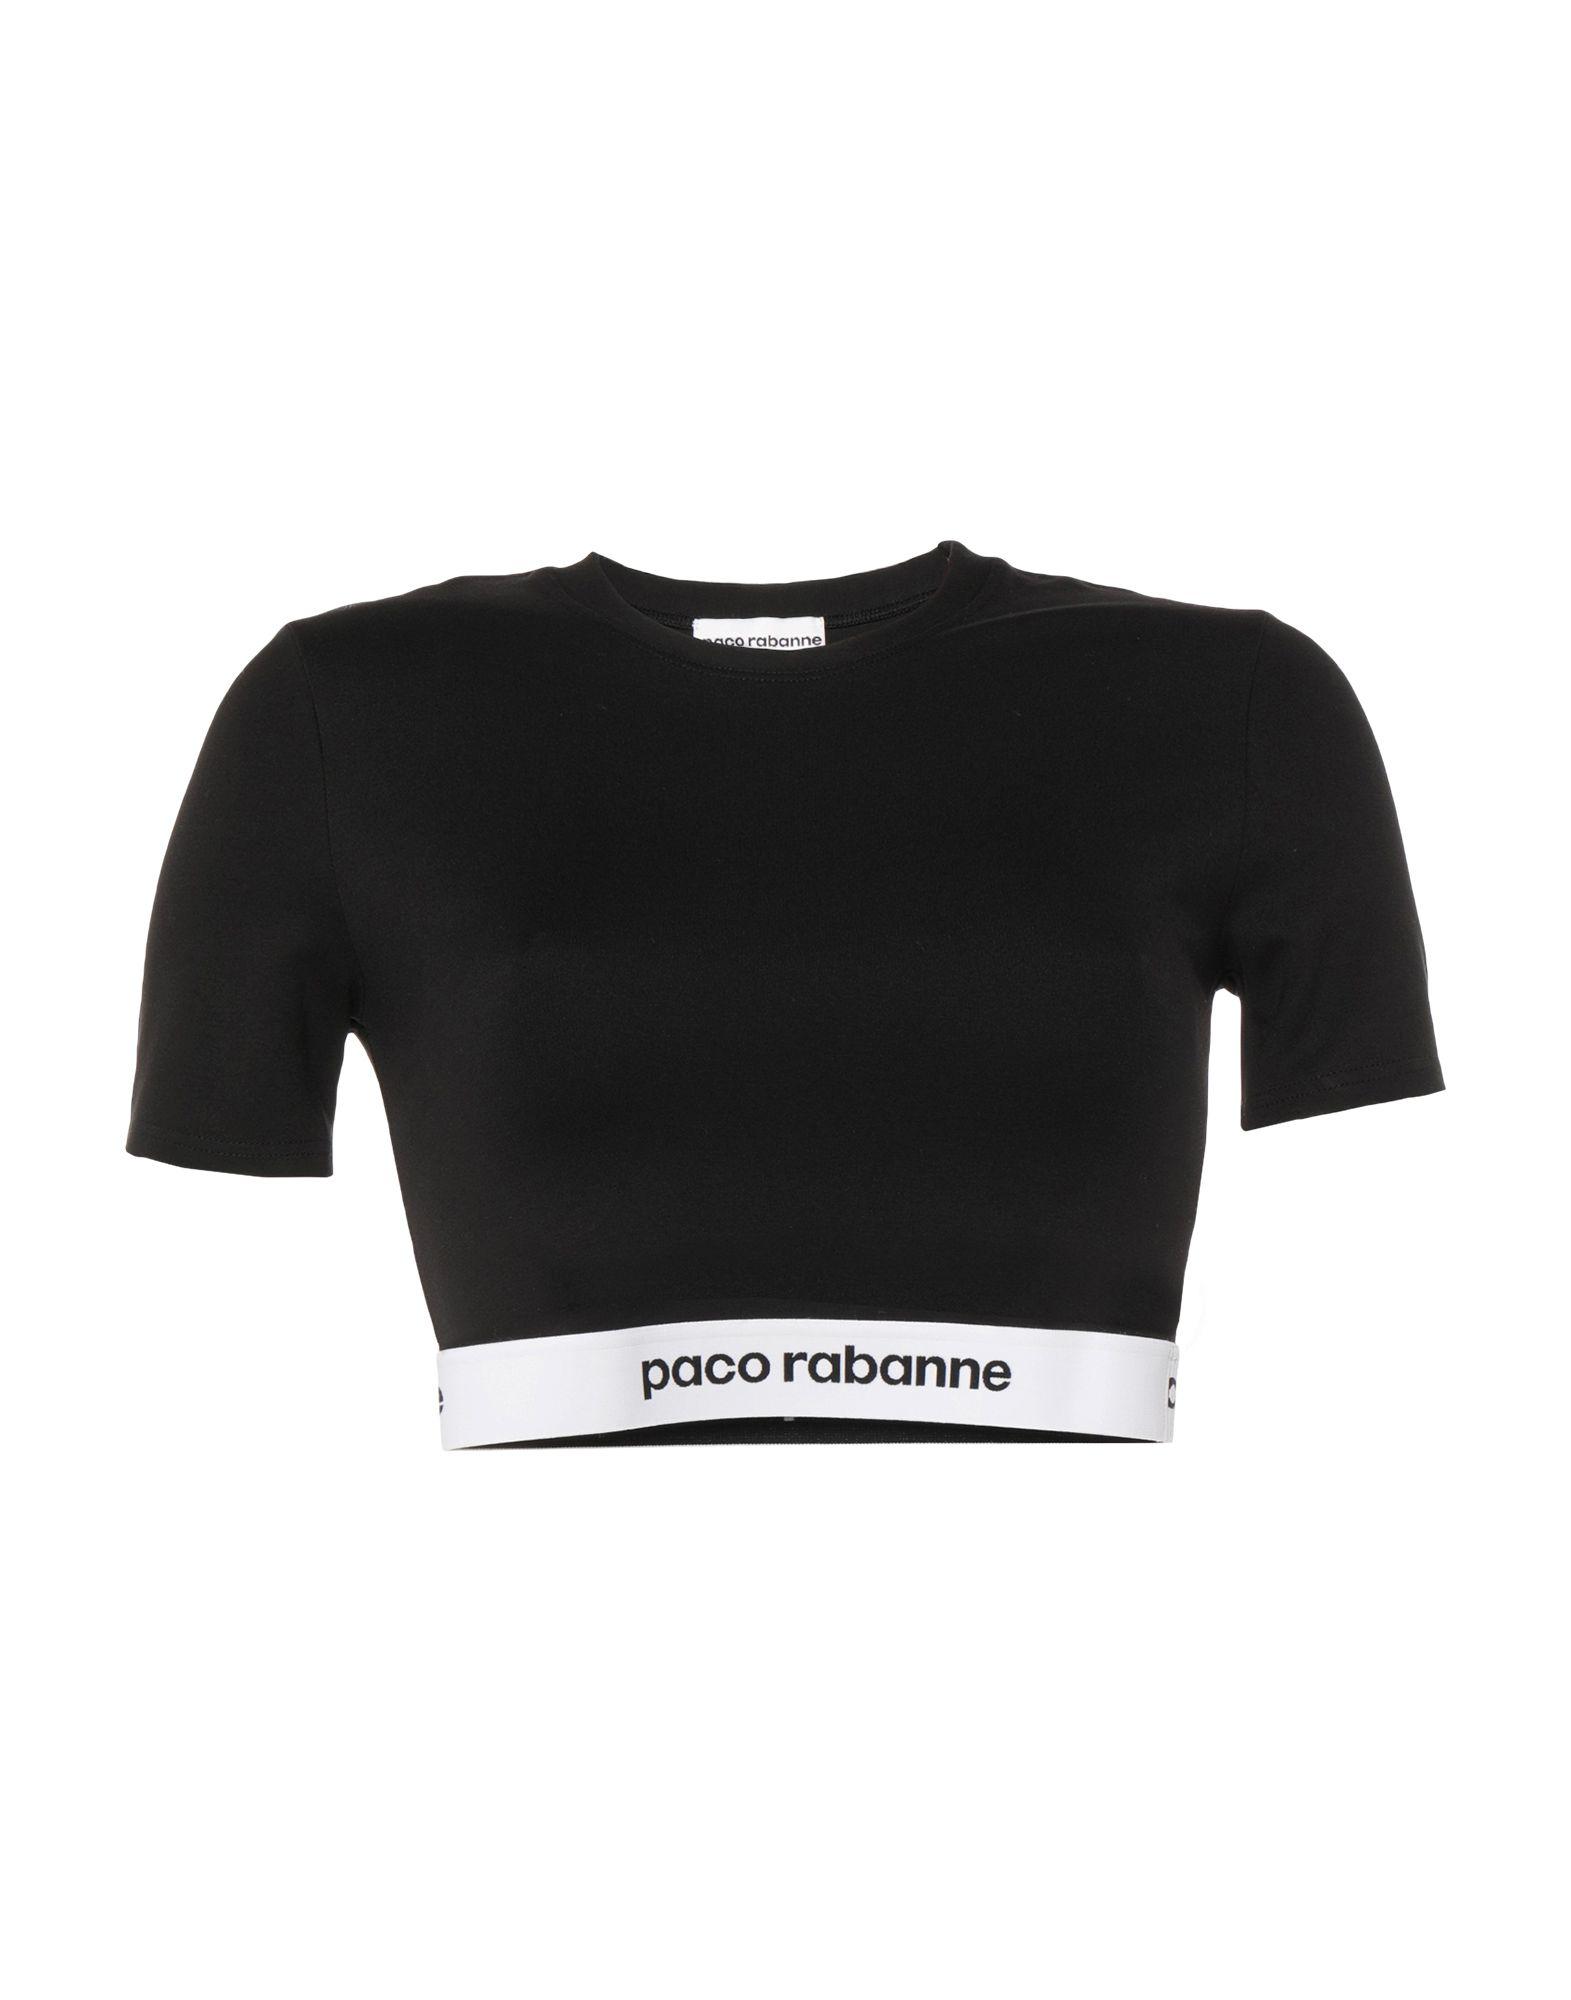 Paco Rabanne Synthetic Logo-waistband Crop Top in Black - Lyst